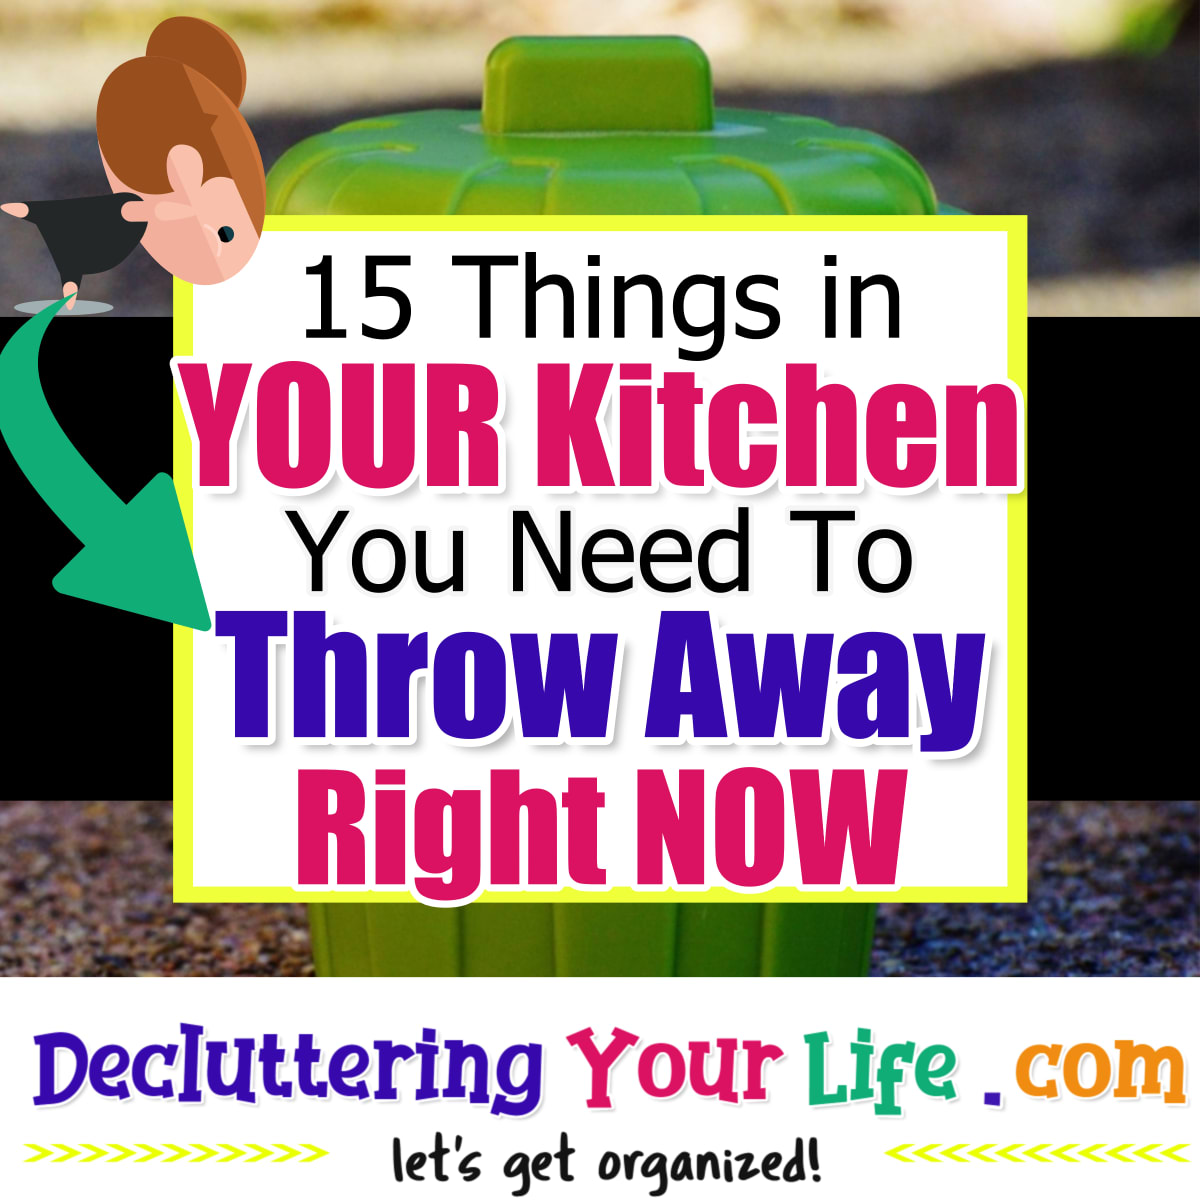 Kitchen Clutter SOLUTIONS - These clever kitchen clutter solutions will create a stunning before and after in your house. Too much kitchen clutter? Here's what to keep and what to throw away